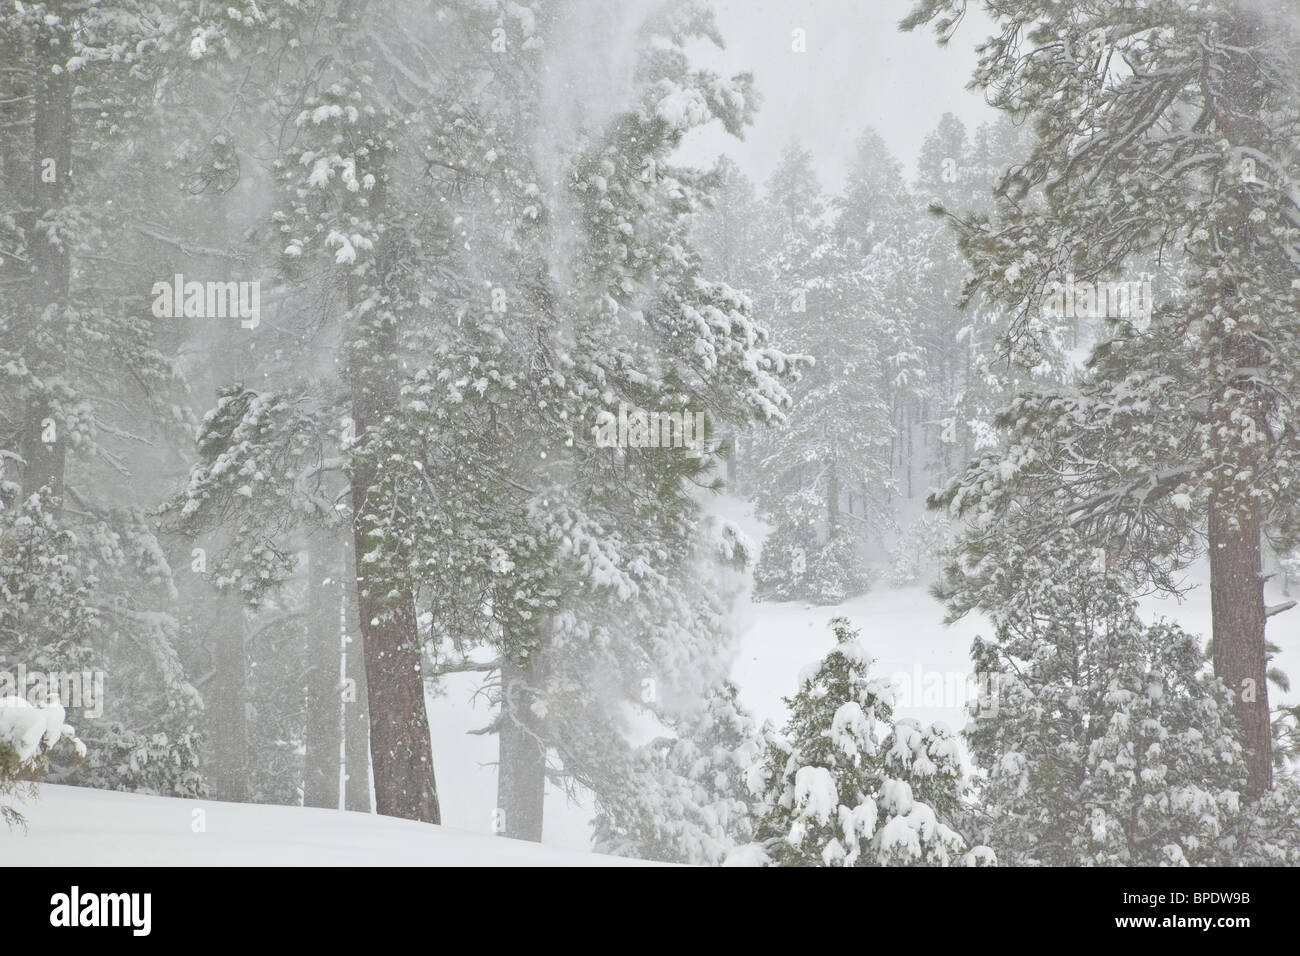 Ponderosa pine forest during February snowstorm in Fay Canyon, Flagstaff, Arizona, TomBean Pix 1926 Stock Photo